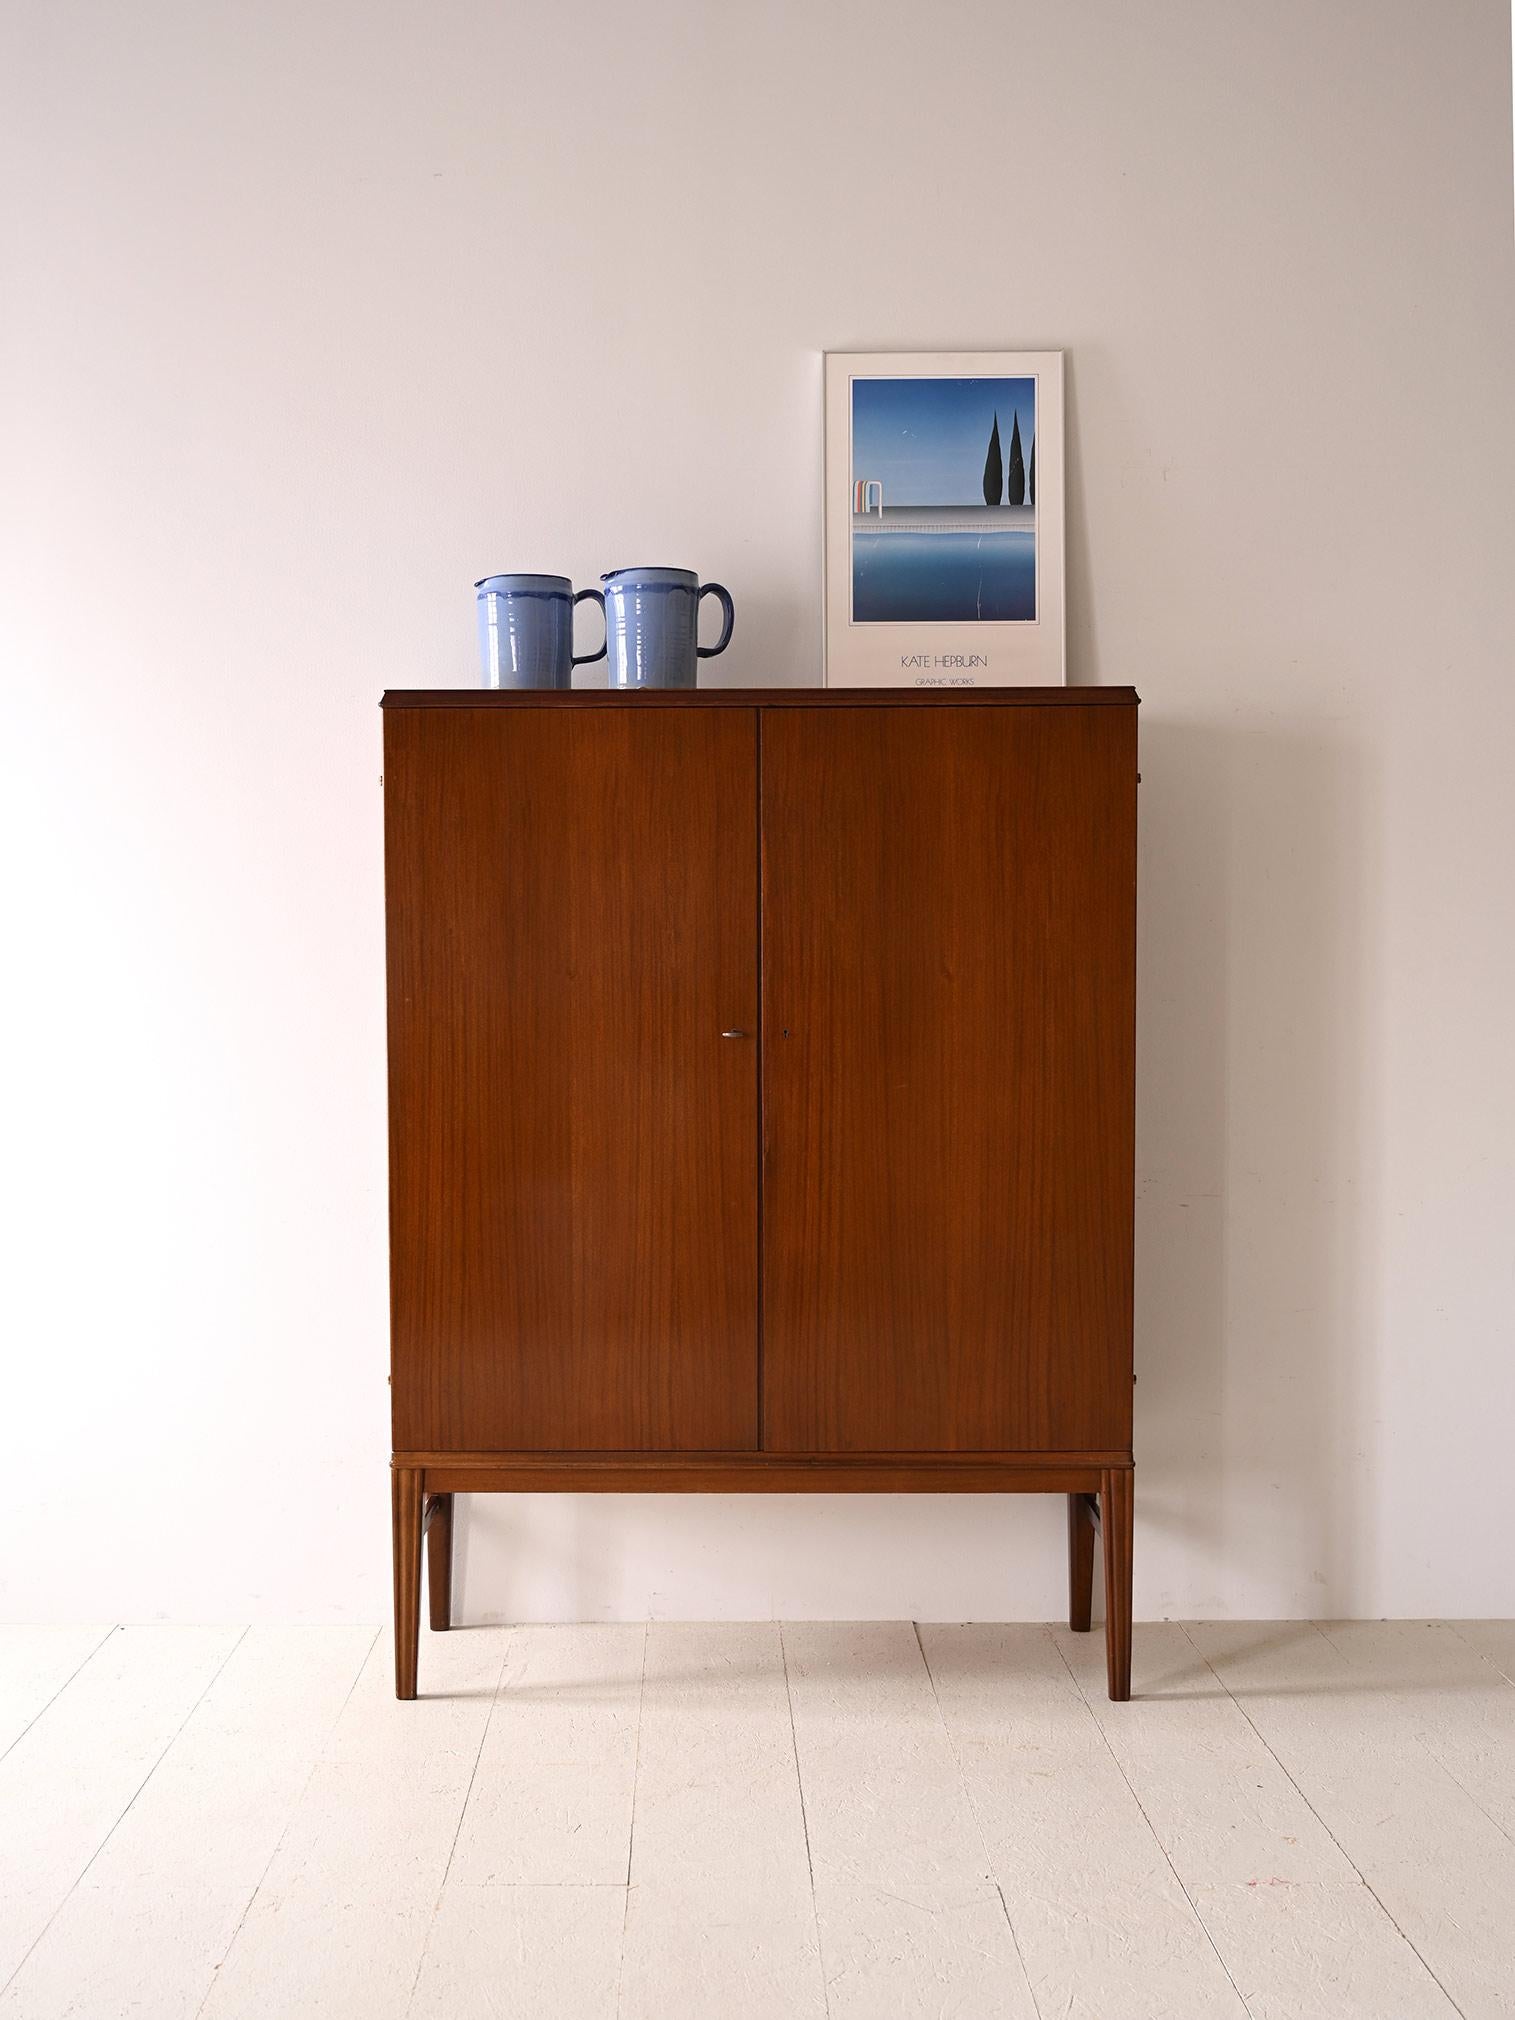 Vintage cabinet with hinged doors.

This elegant cabinet with regular lines features two lockable hinged doors and long tapered legs that slender the figure.
Internally it is divided into compartments made of shelves and small drawers.
Suitable as